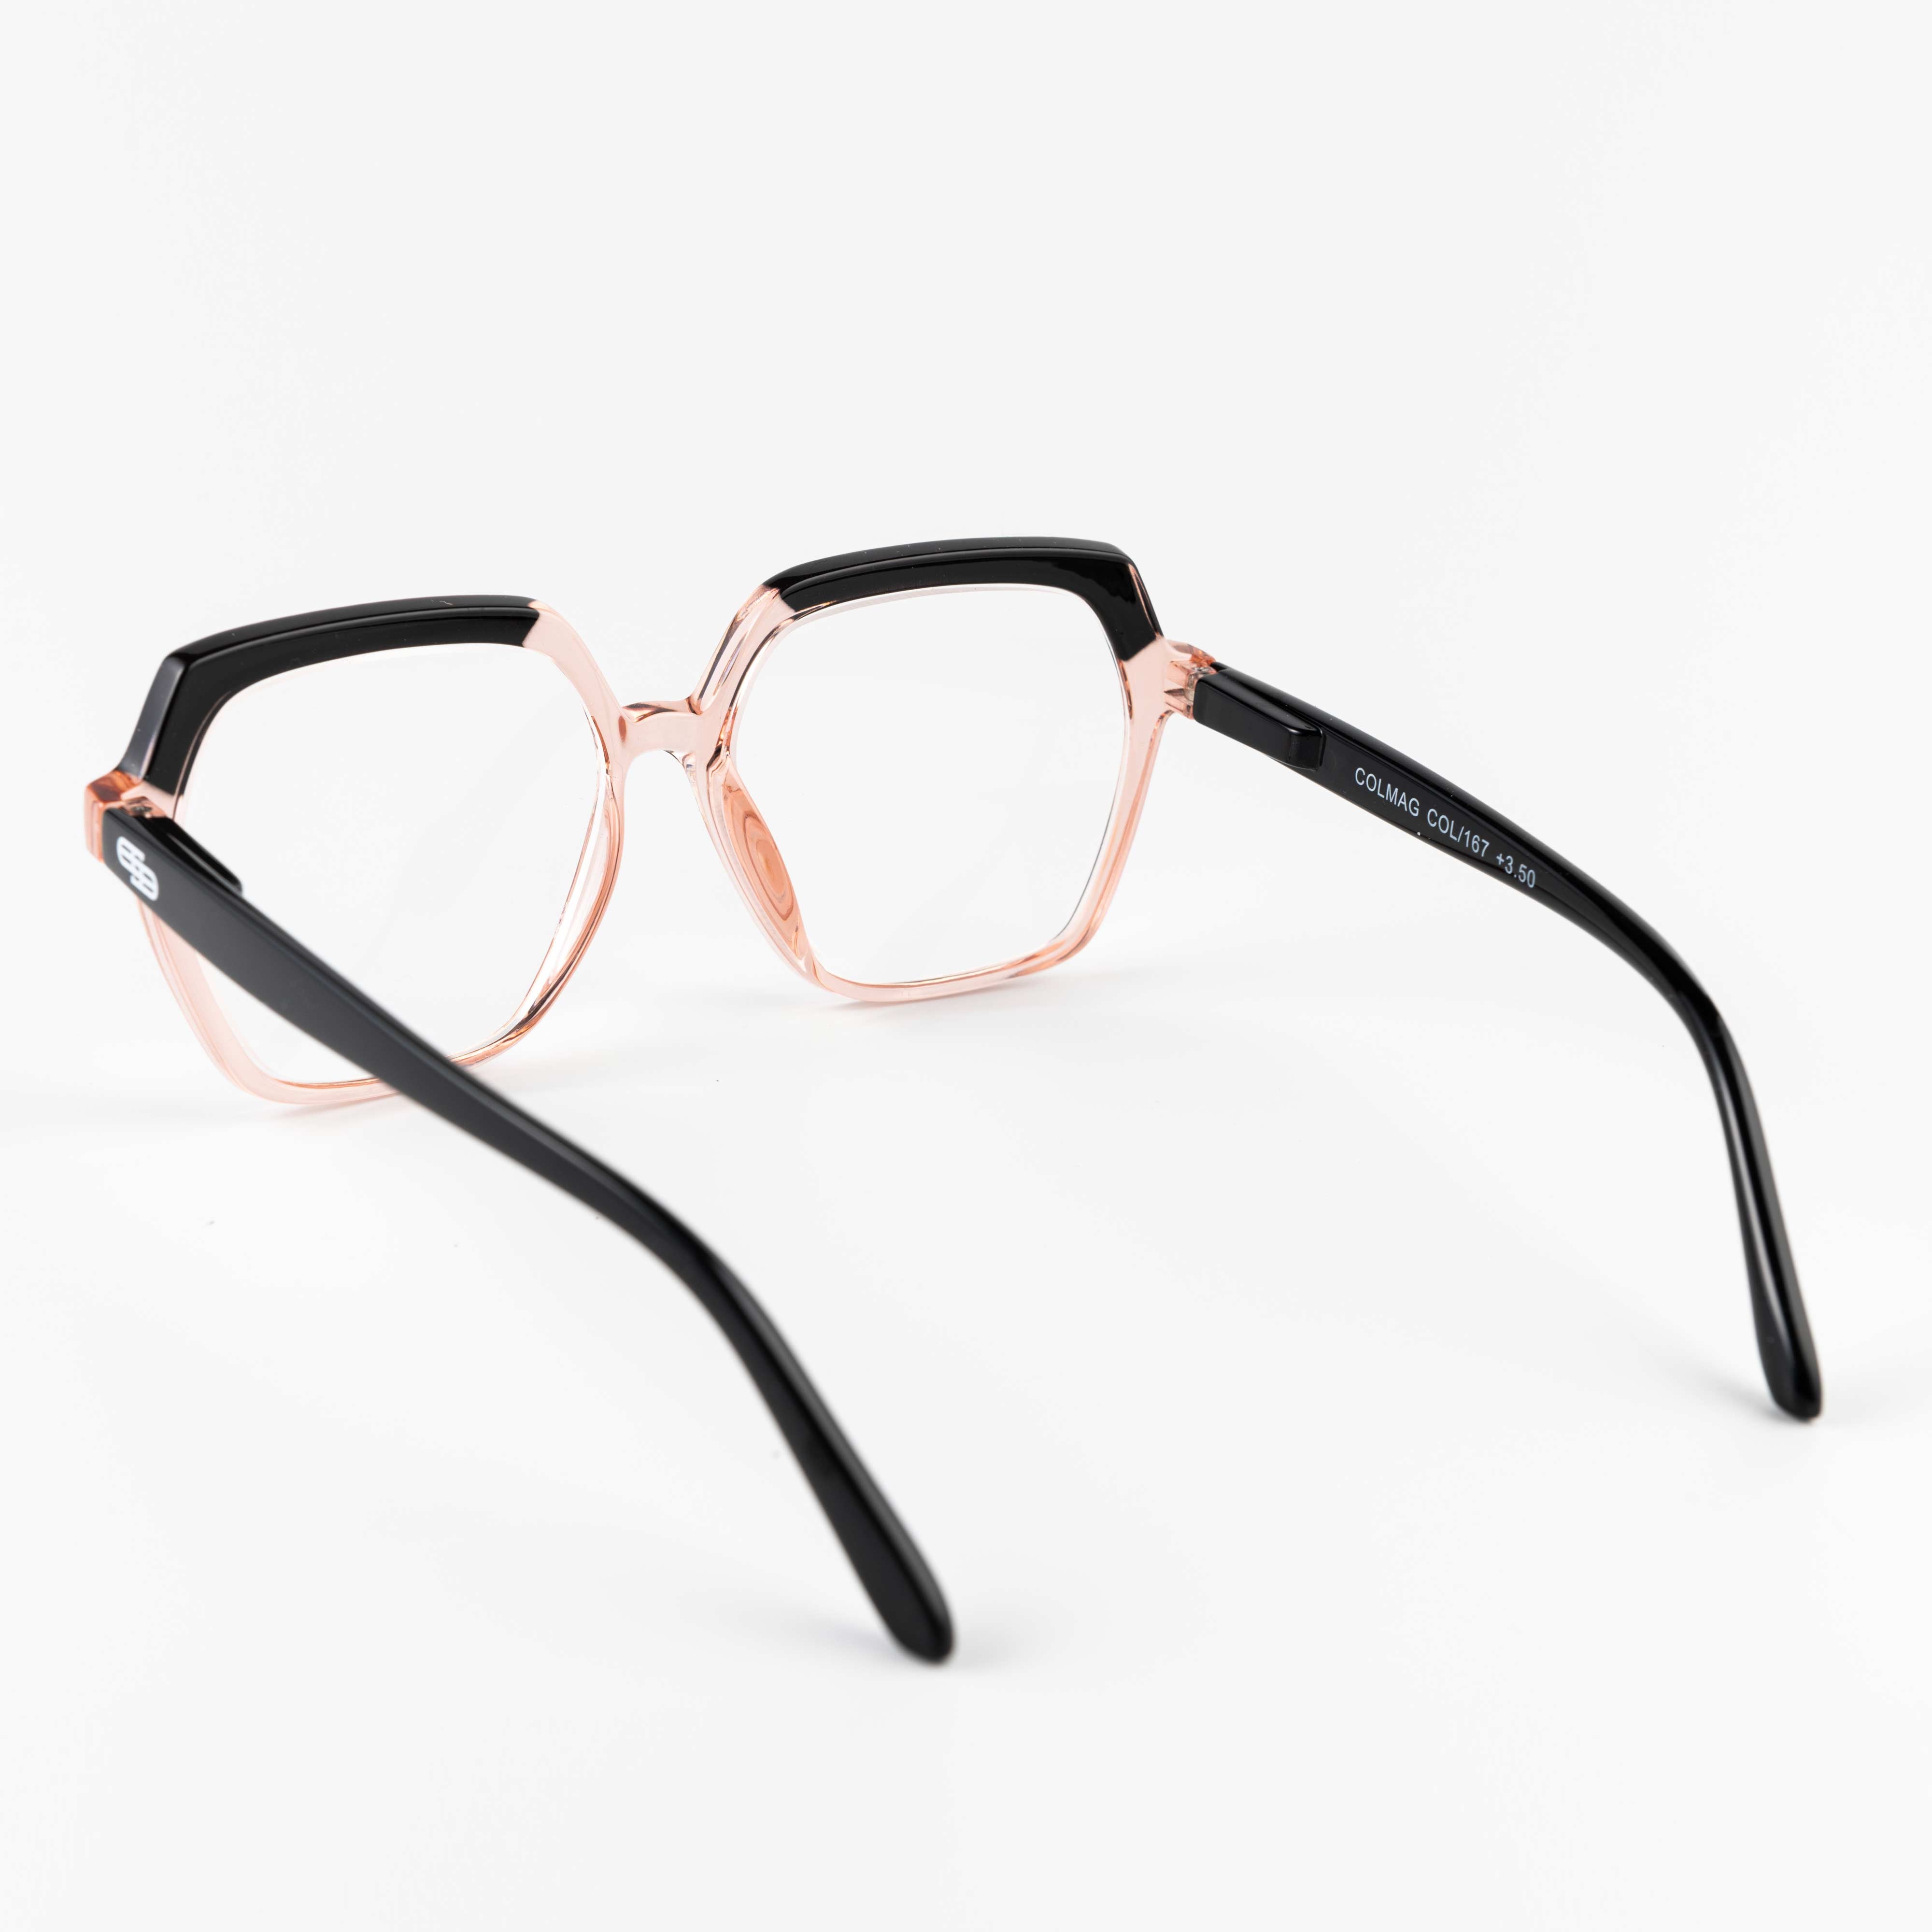 Beige and black square reading glasses